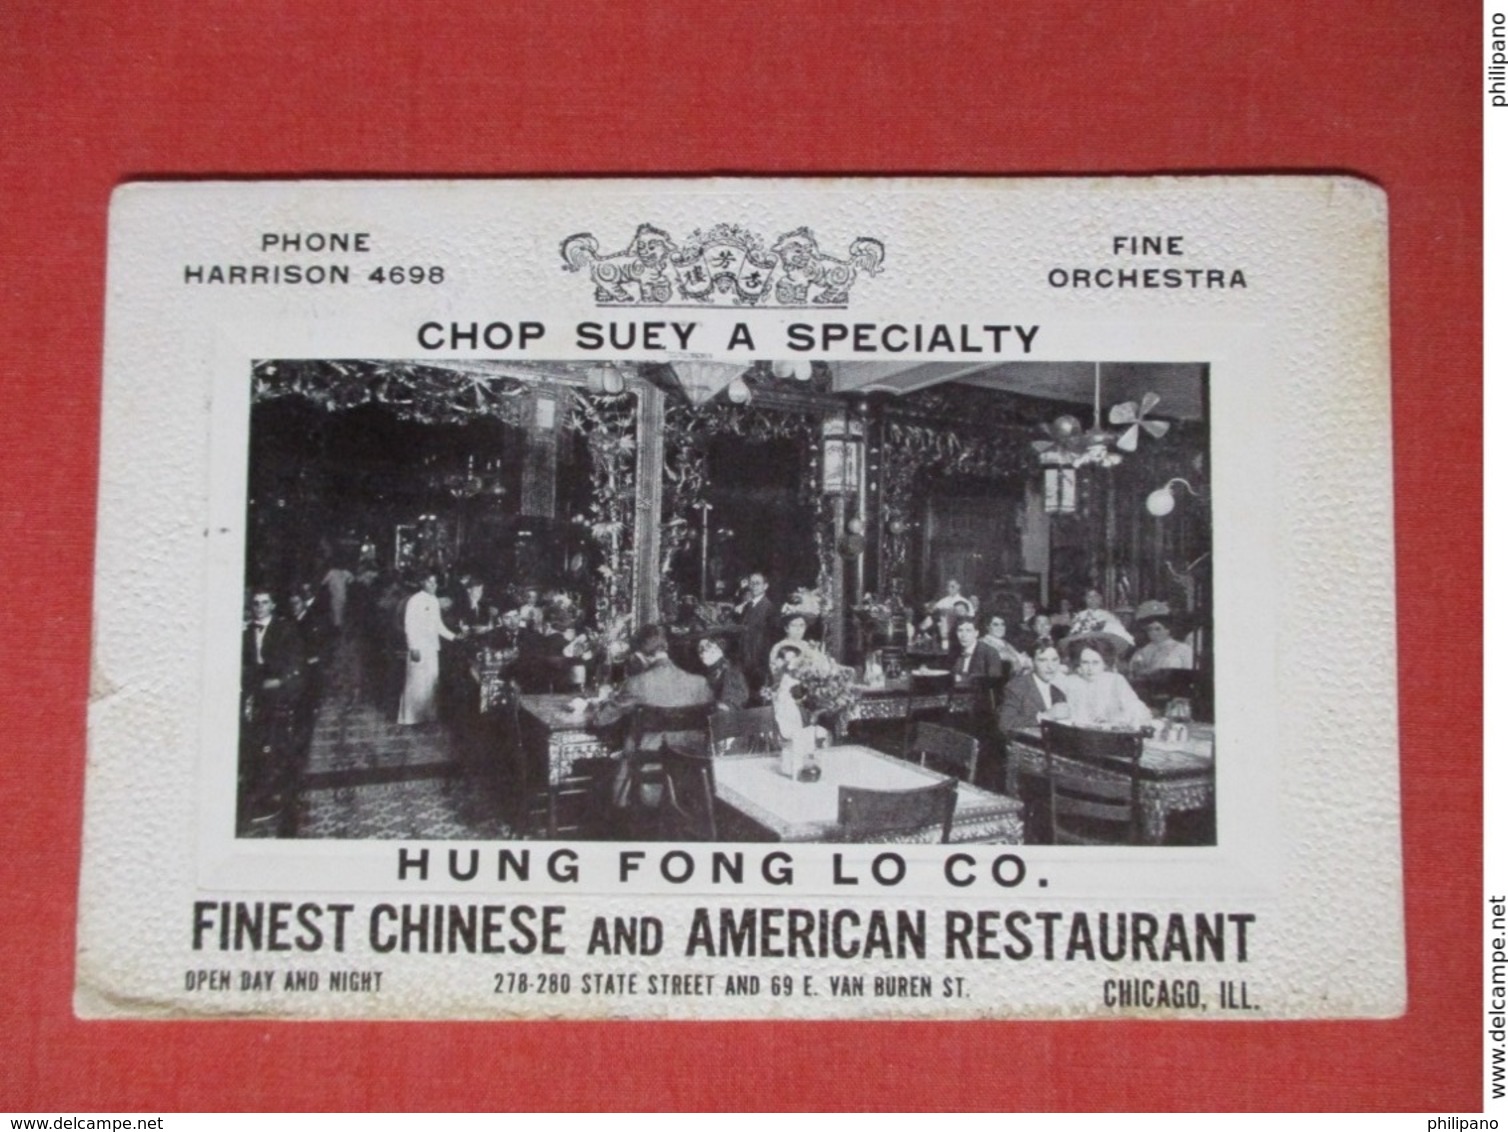 Hung Fung Lo Co. Chop Suey A Specialty  Chinese & American Restaurant  Illinois > Chicago   Ref 3662 - Chicago